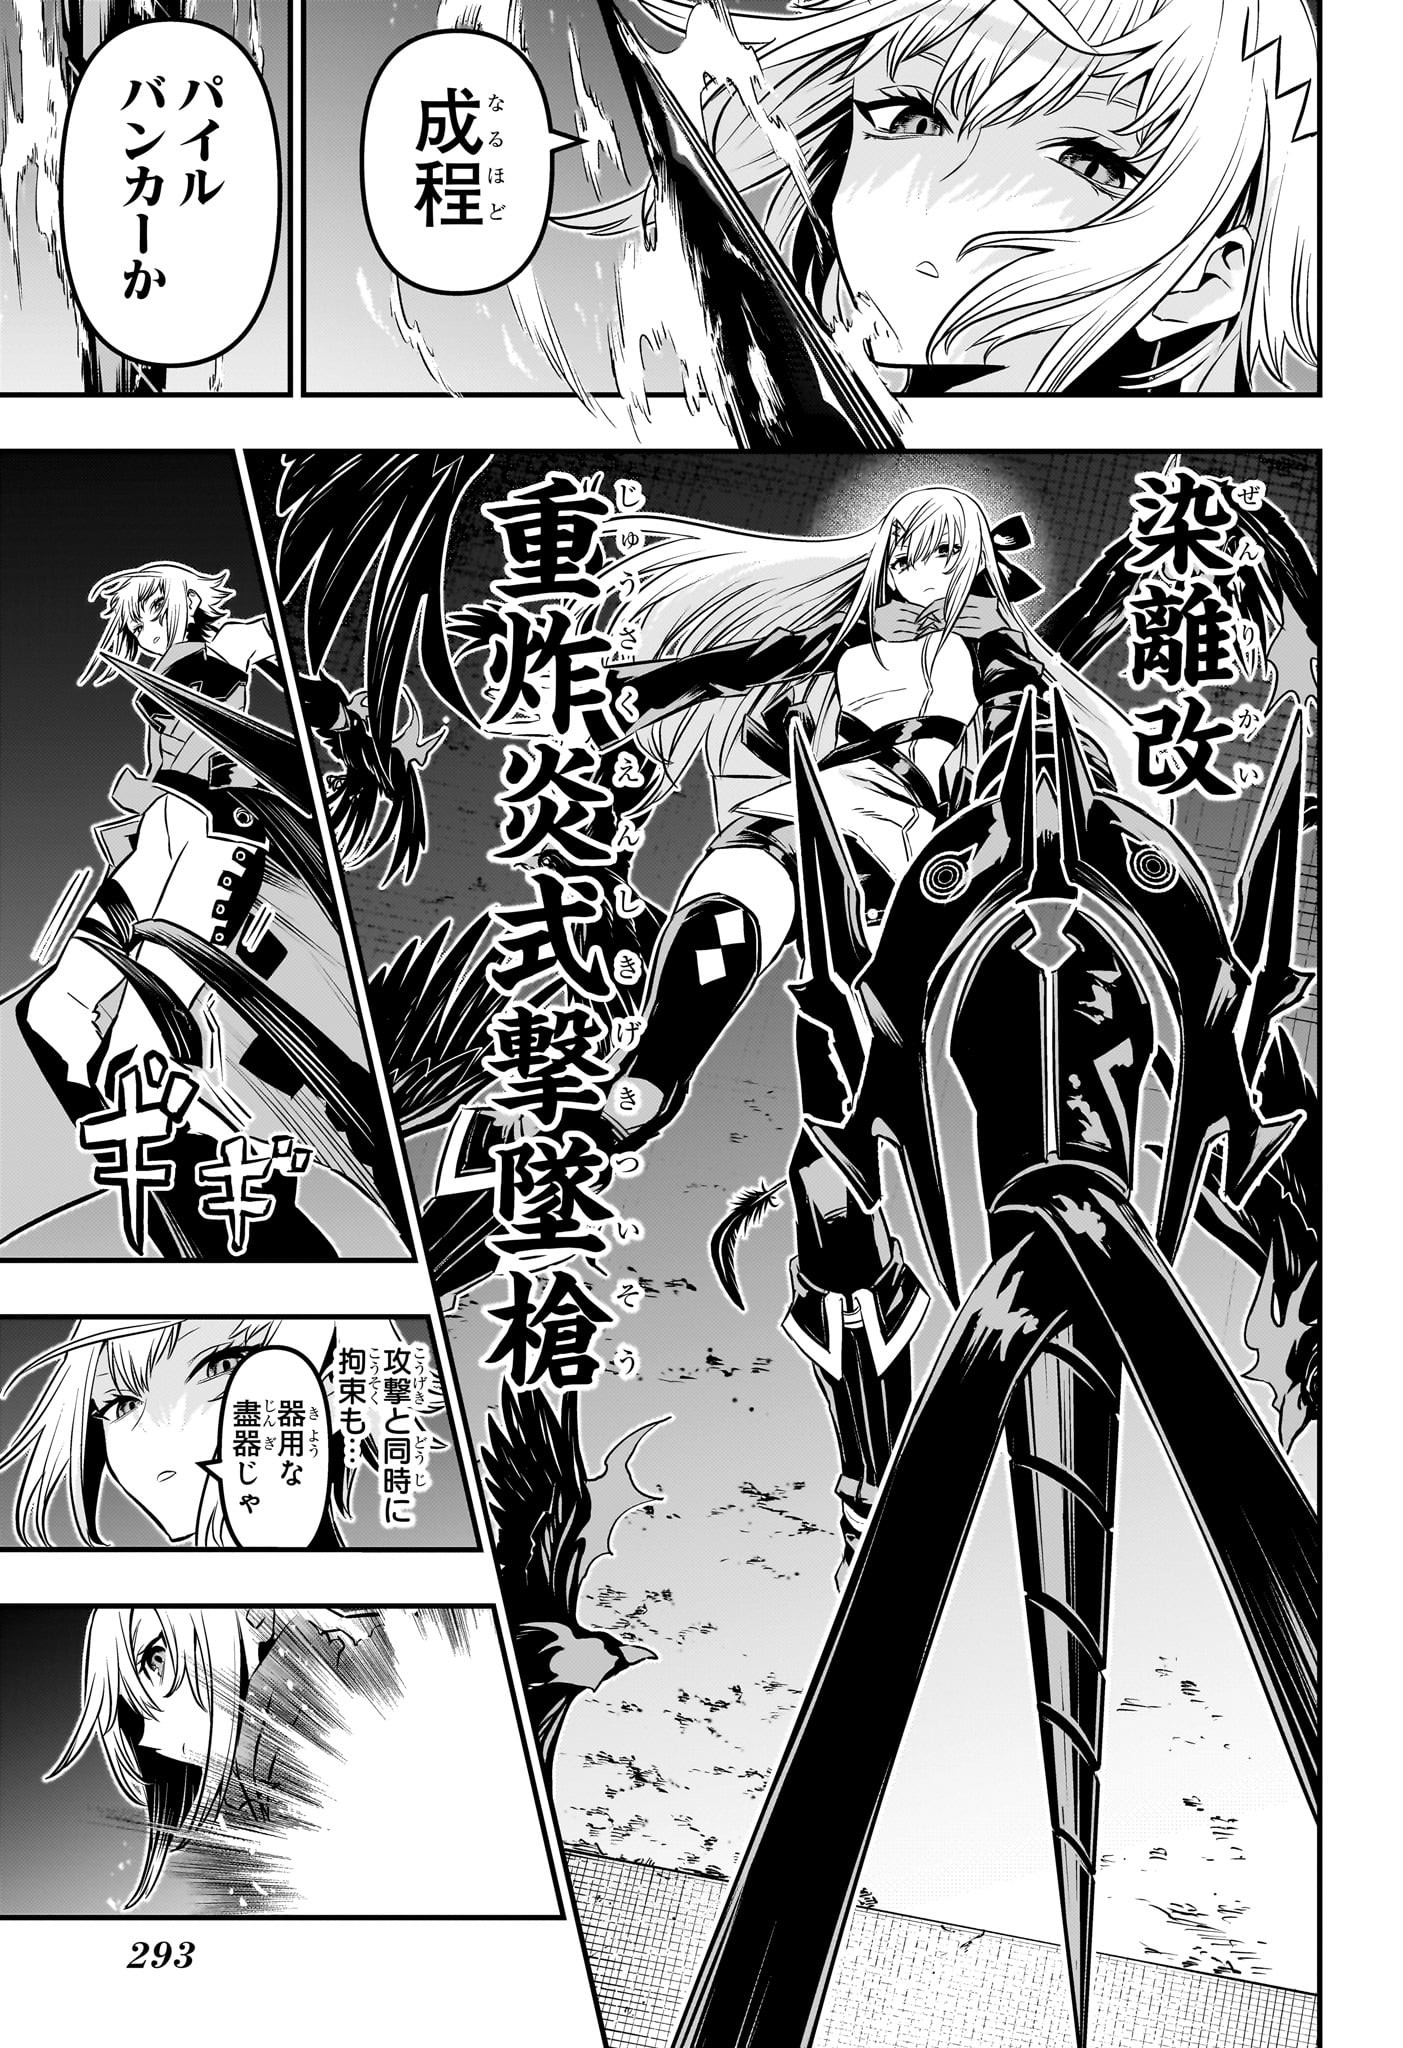 Nue no Onmyouji - Chapter 58 - Page 13